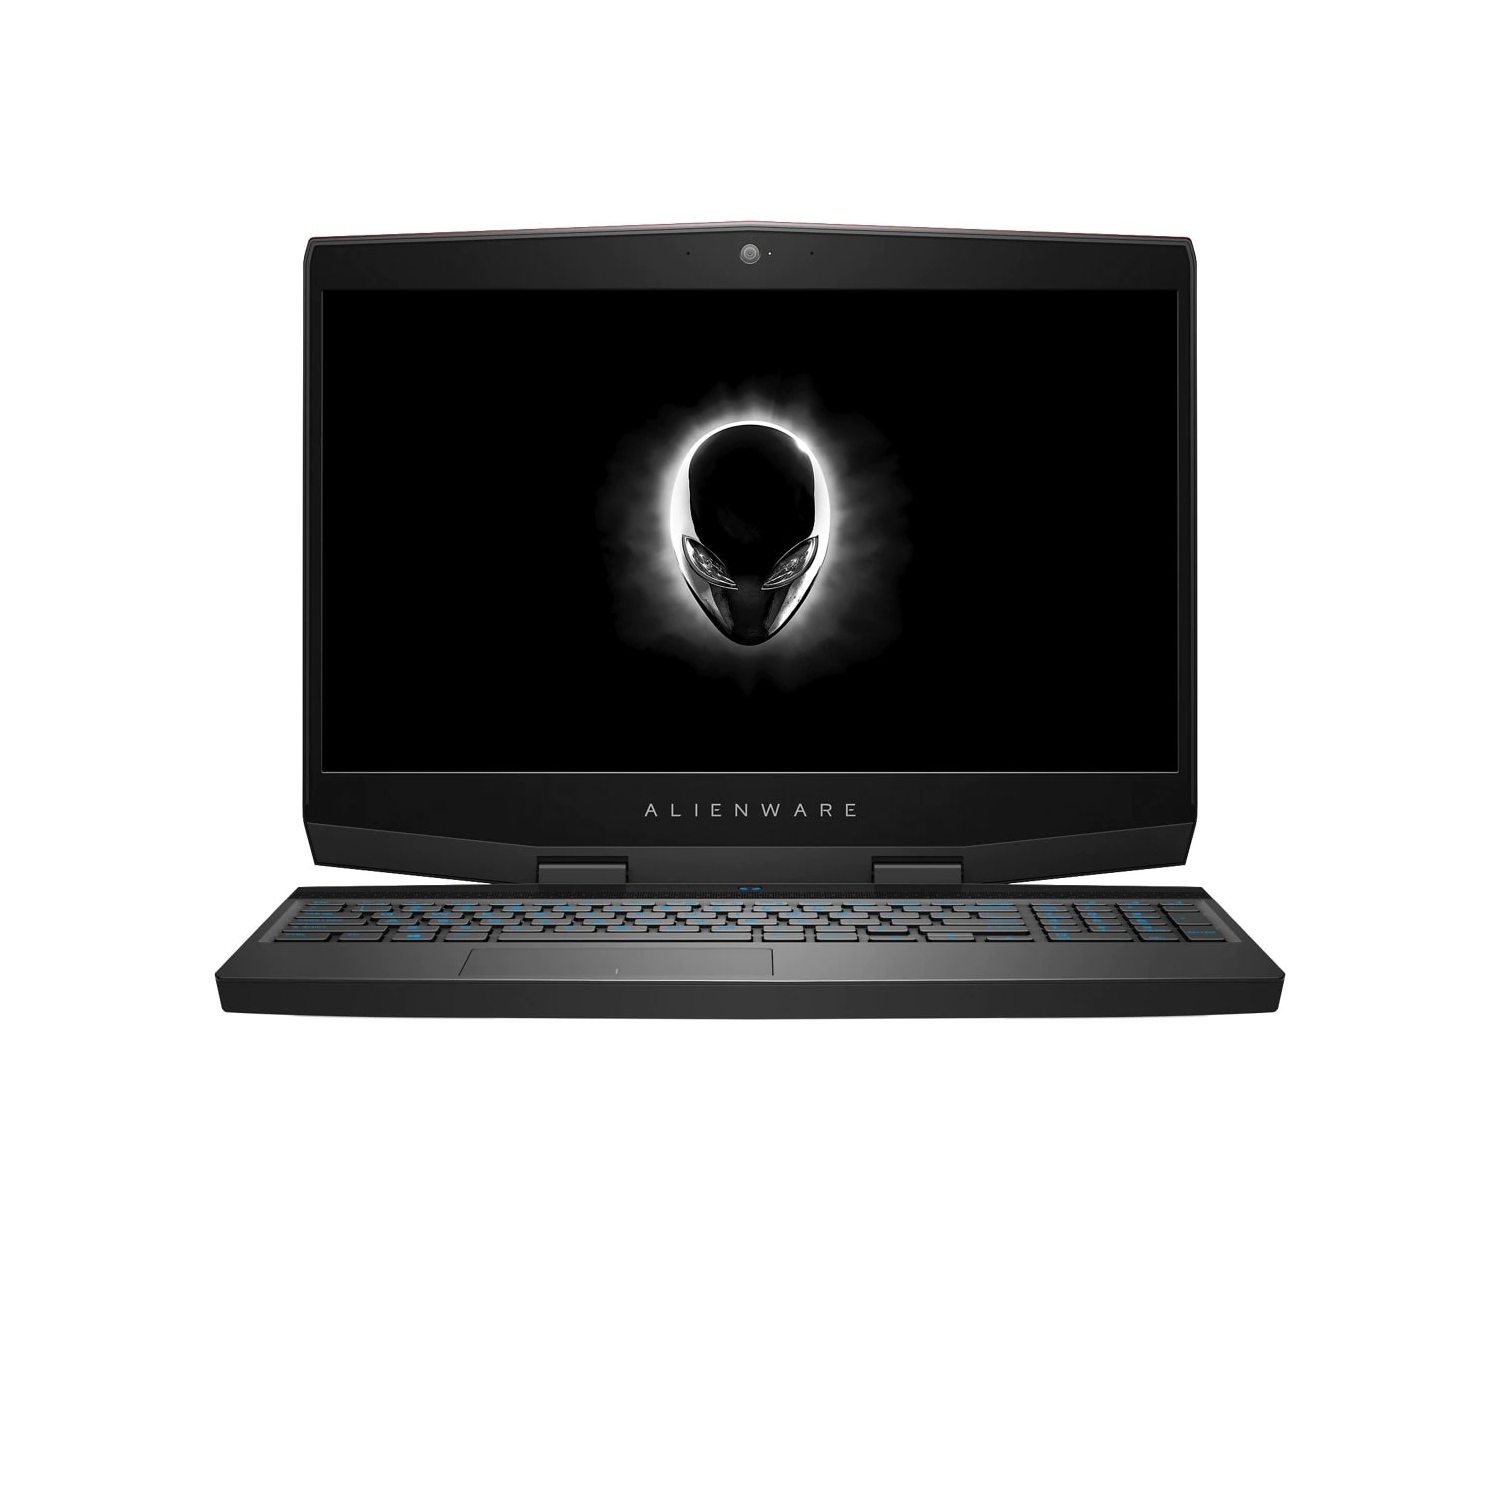 Refurbished (Excellent) - Dell Alienware m15 Gaming Laptop (2018) | 15.6" FHD | Core i7 - 256GB SSD - 16GB RAM - RTX 2070 | 6 Cores @ 4.5 GHz Certified Refurbished